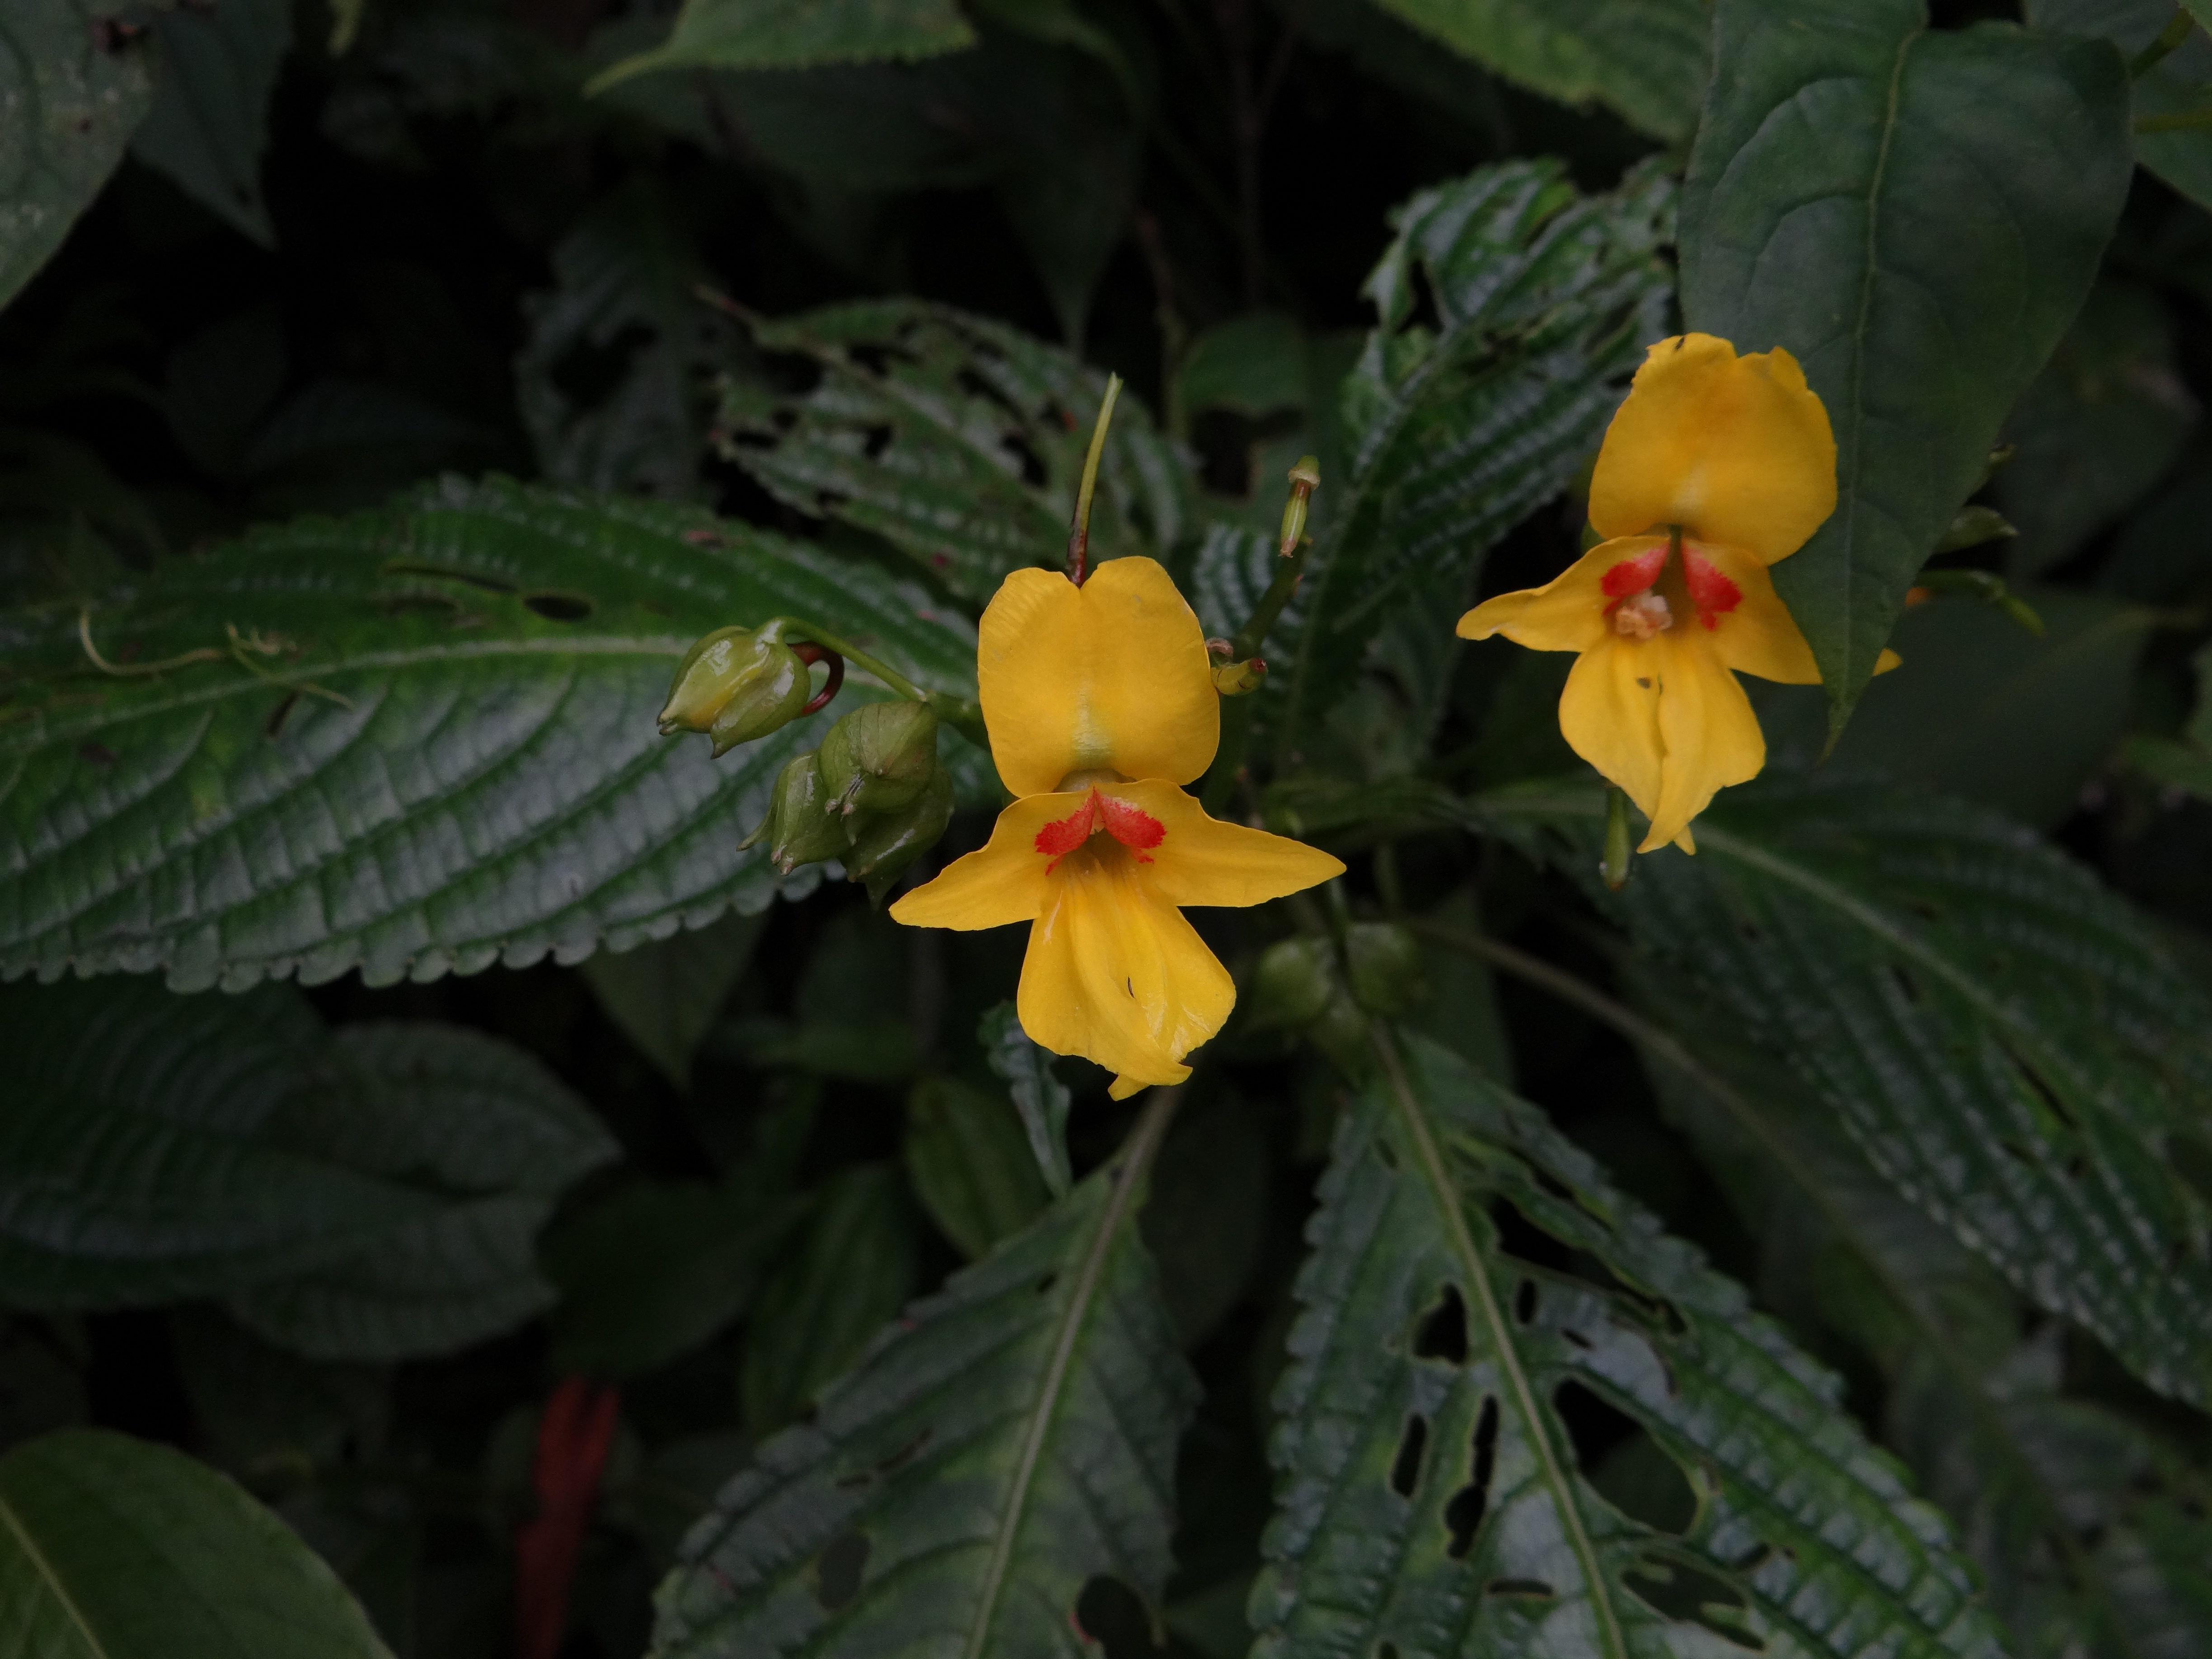 The Impatiens lohitensis is a new species of wild banana discovered in India, now home to 23 different species of banana.